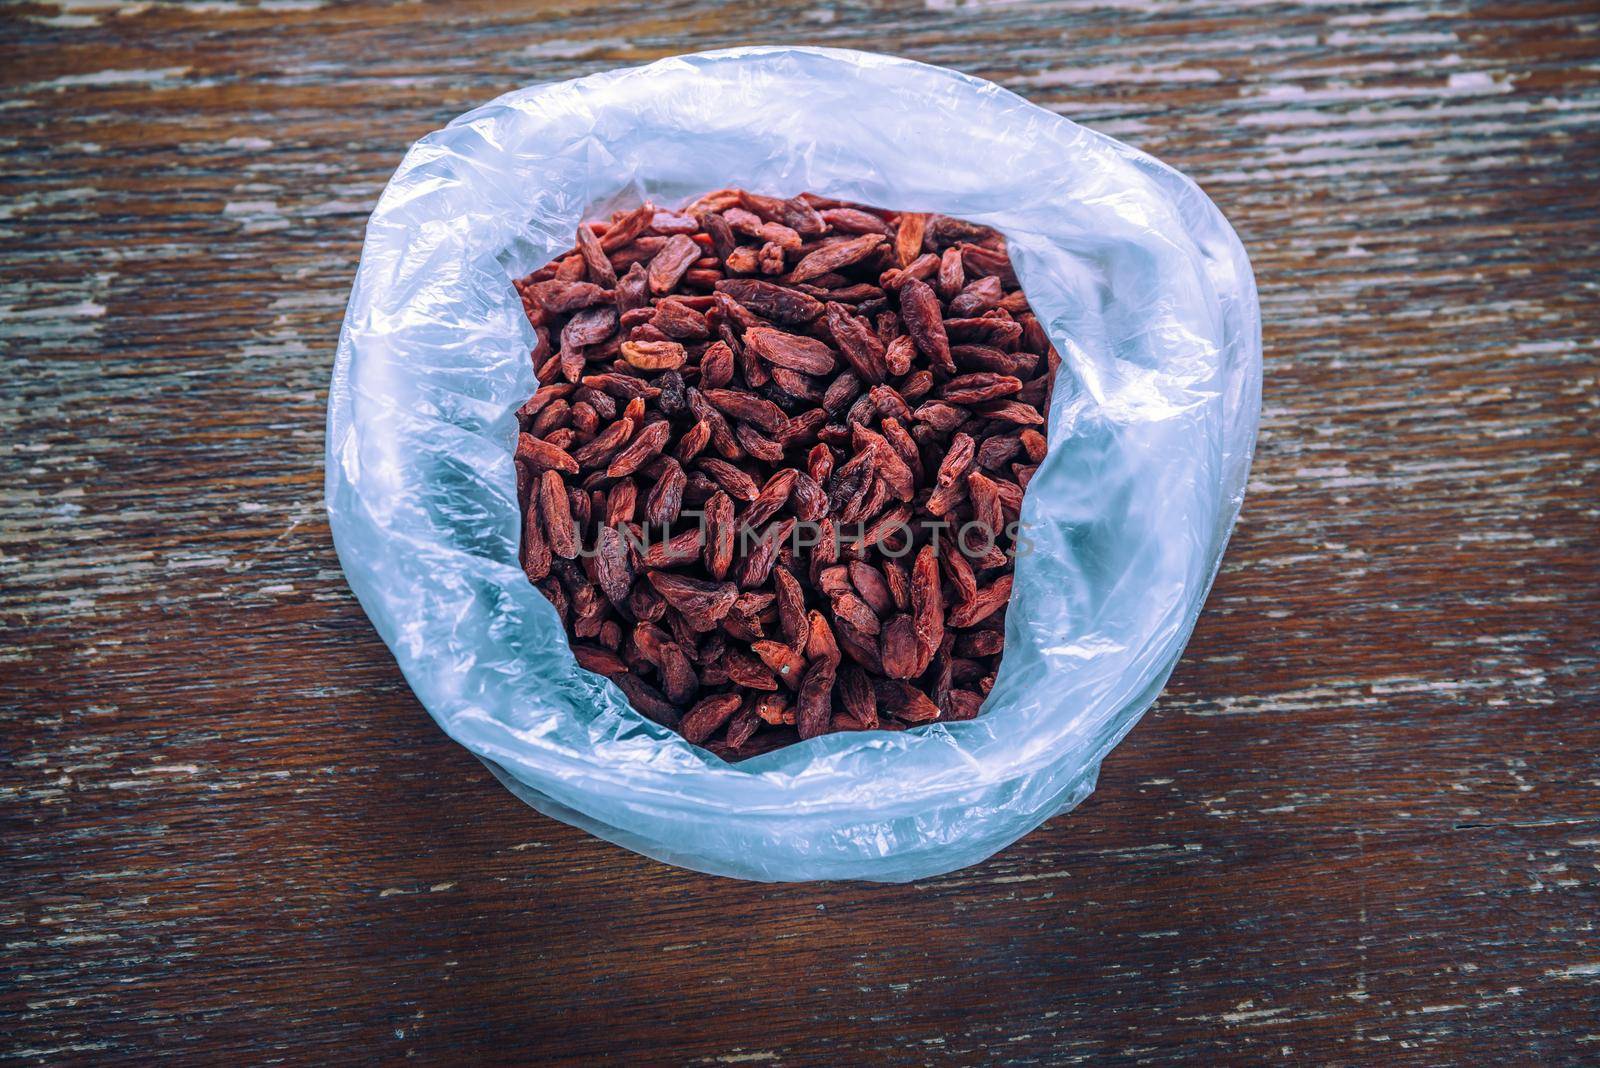 Goji berries in the bag on a wooden table